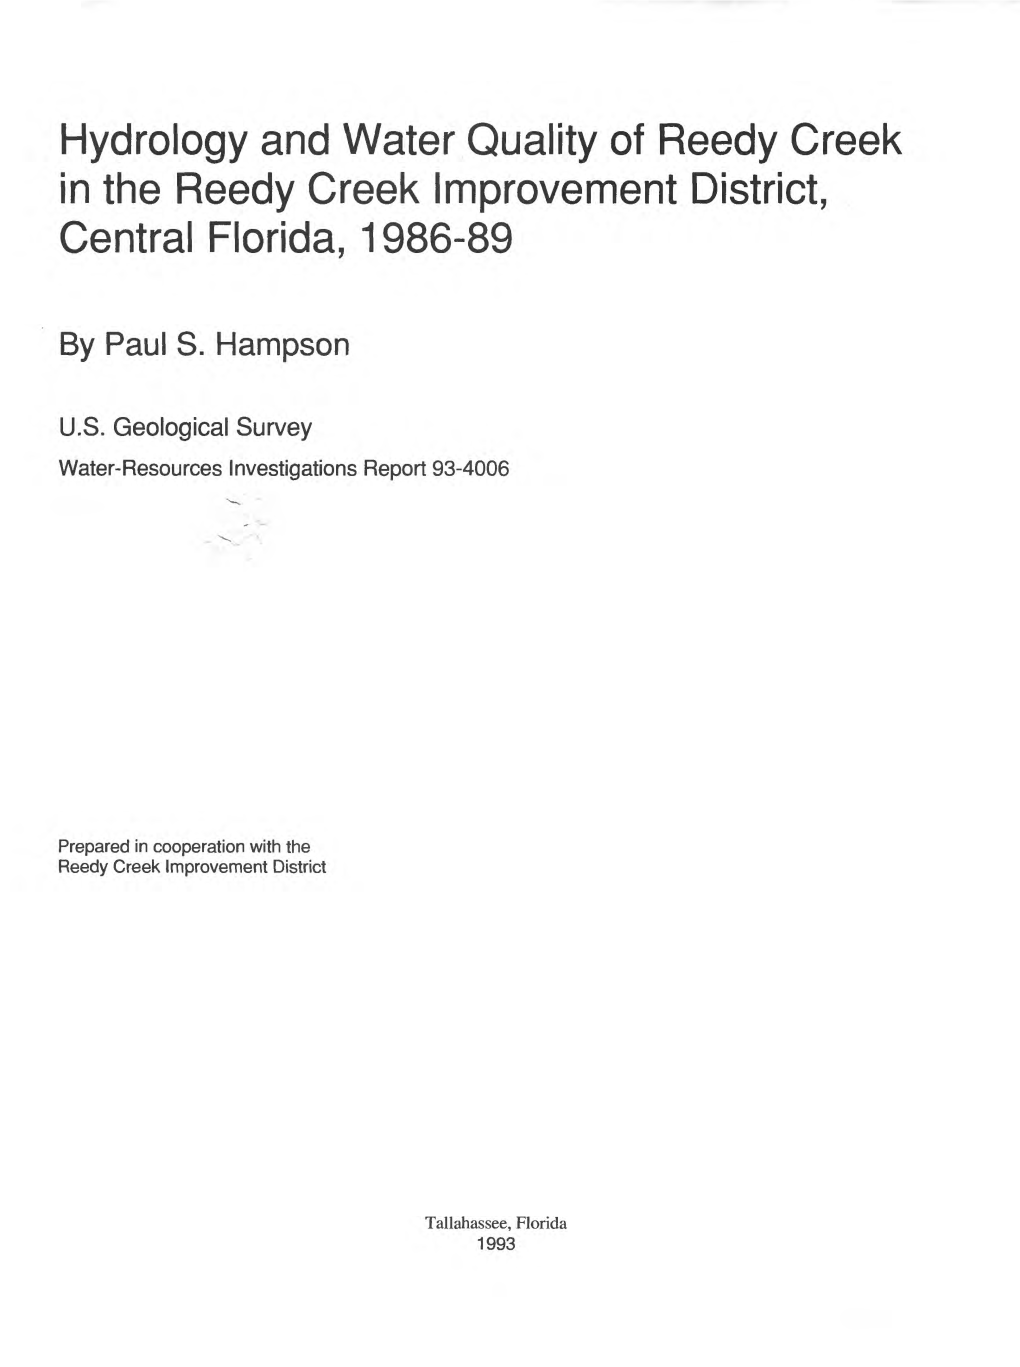 Hydrology and Water Quality of Reedy Creek in the Reedy Creek Improvement District, Central Florida, 1986-89